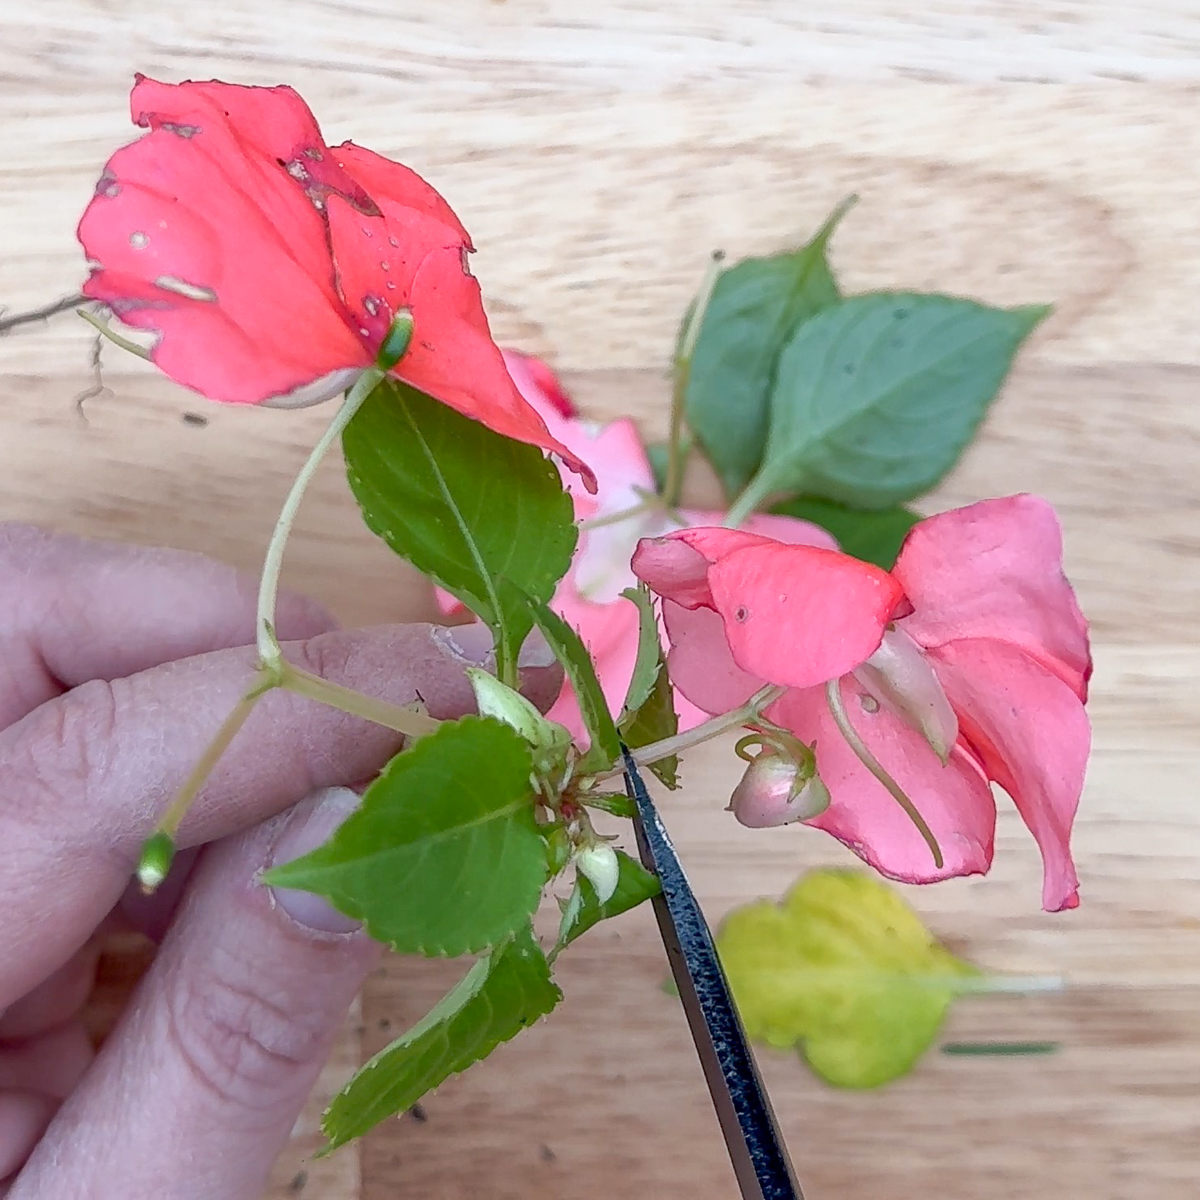 trimming flowers off impatiens cutting for propagation